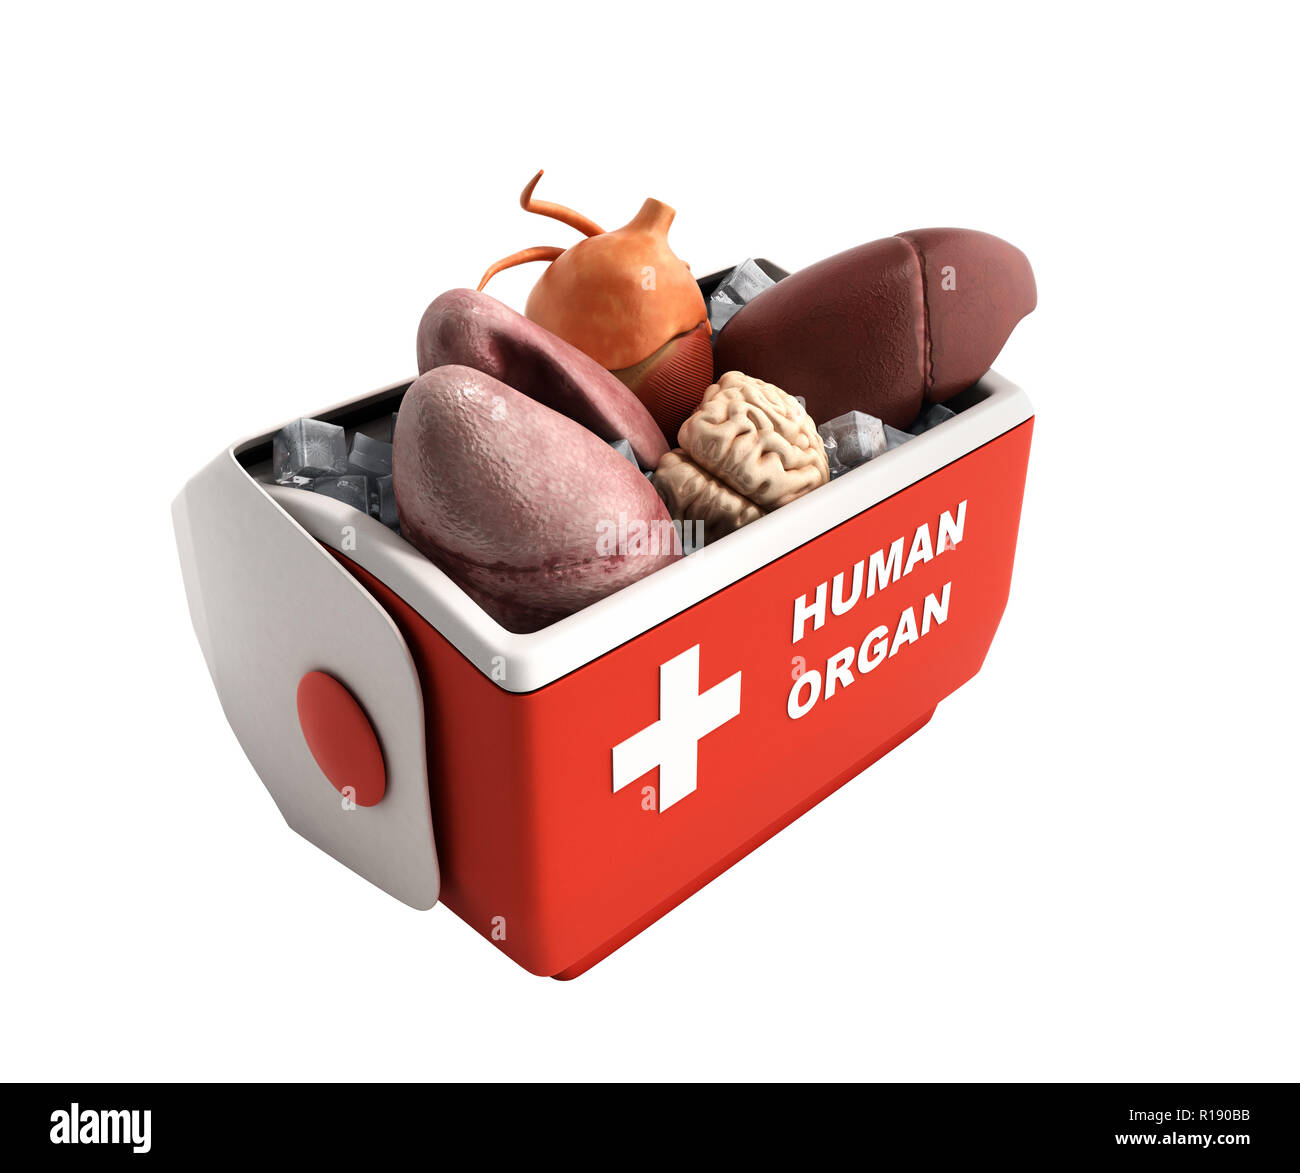 organ transportation concept open human organ refrigerator box red 3d render on white no shadow background Stock Photo